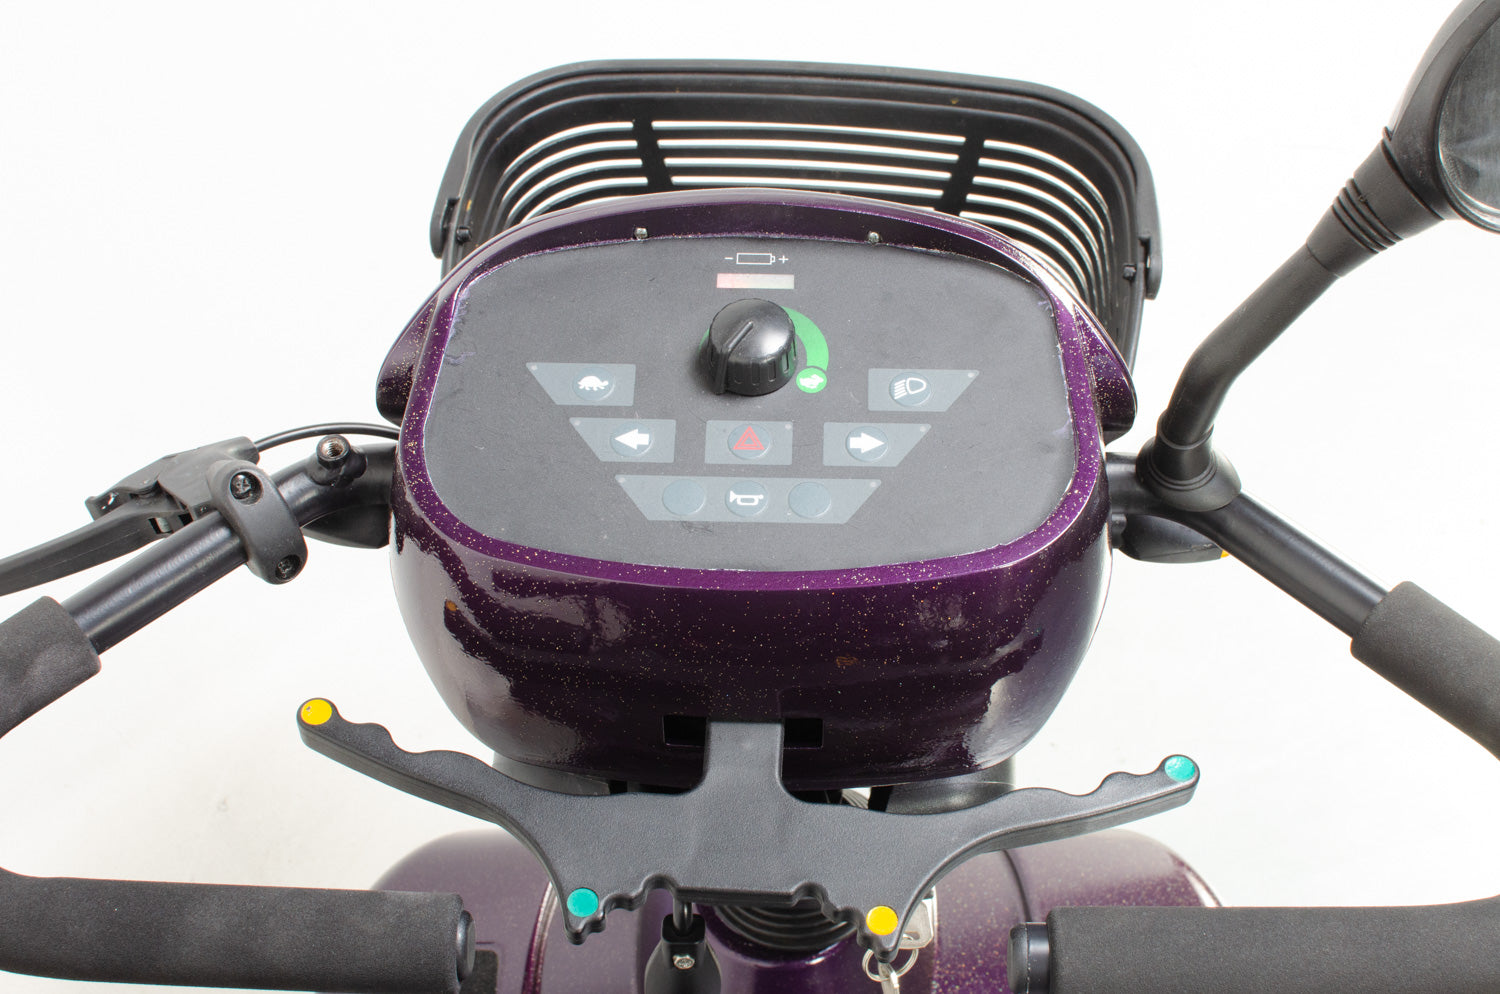 2018 Sunrise Medical Sterling S425 Electric Mobility Scooter Used Second Hand 8mph Mid Size Holographic Purple